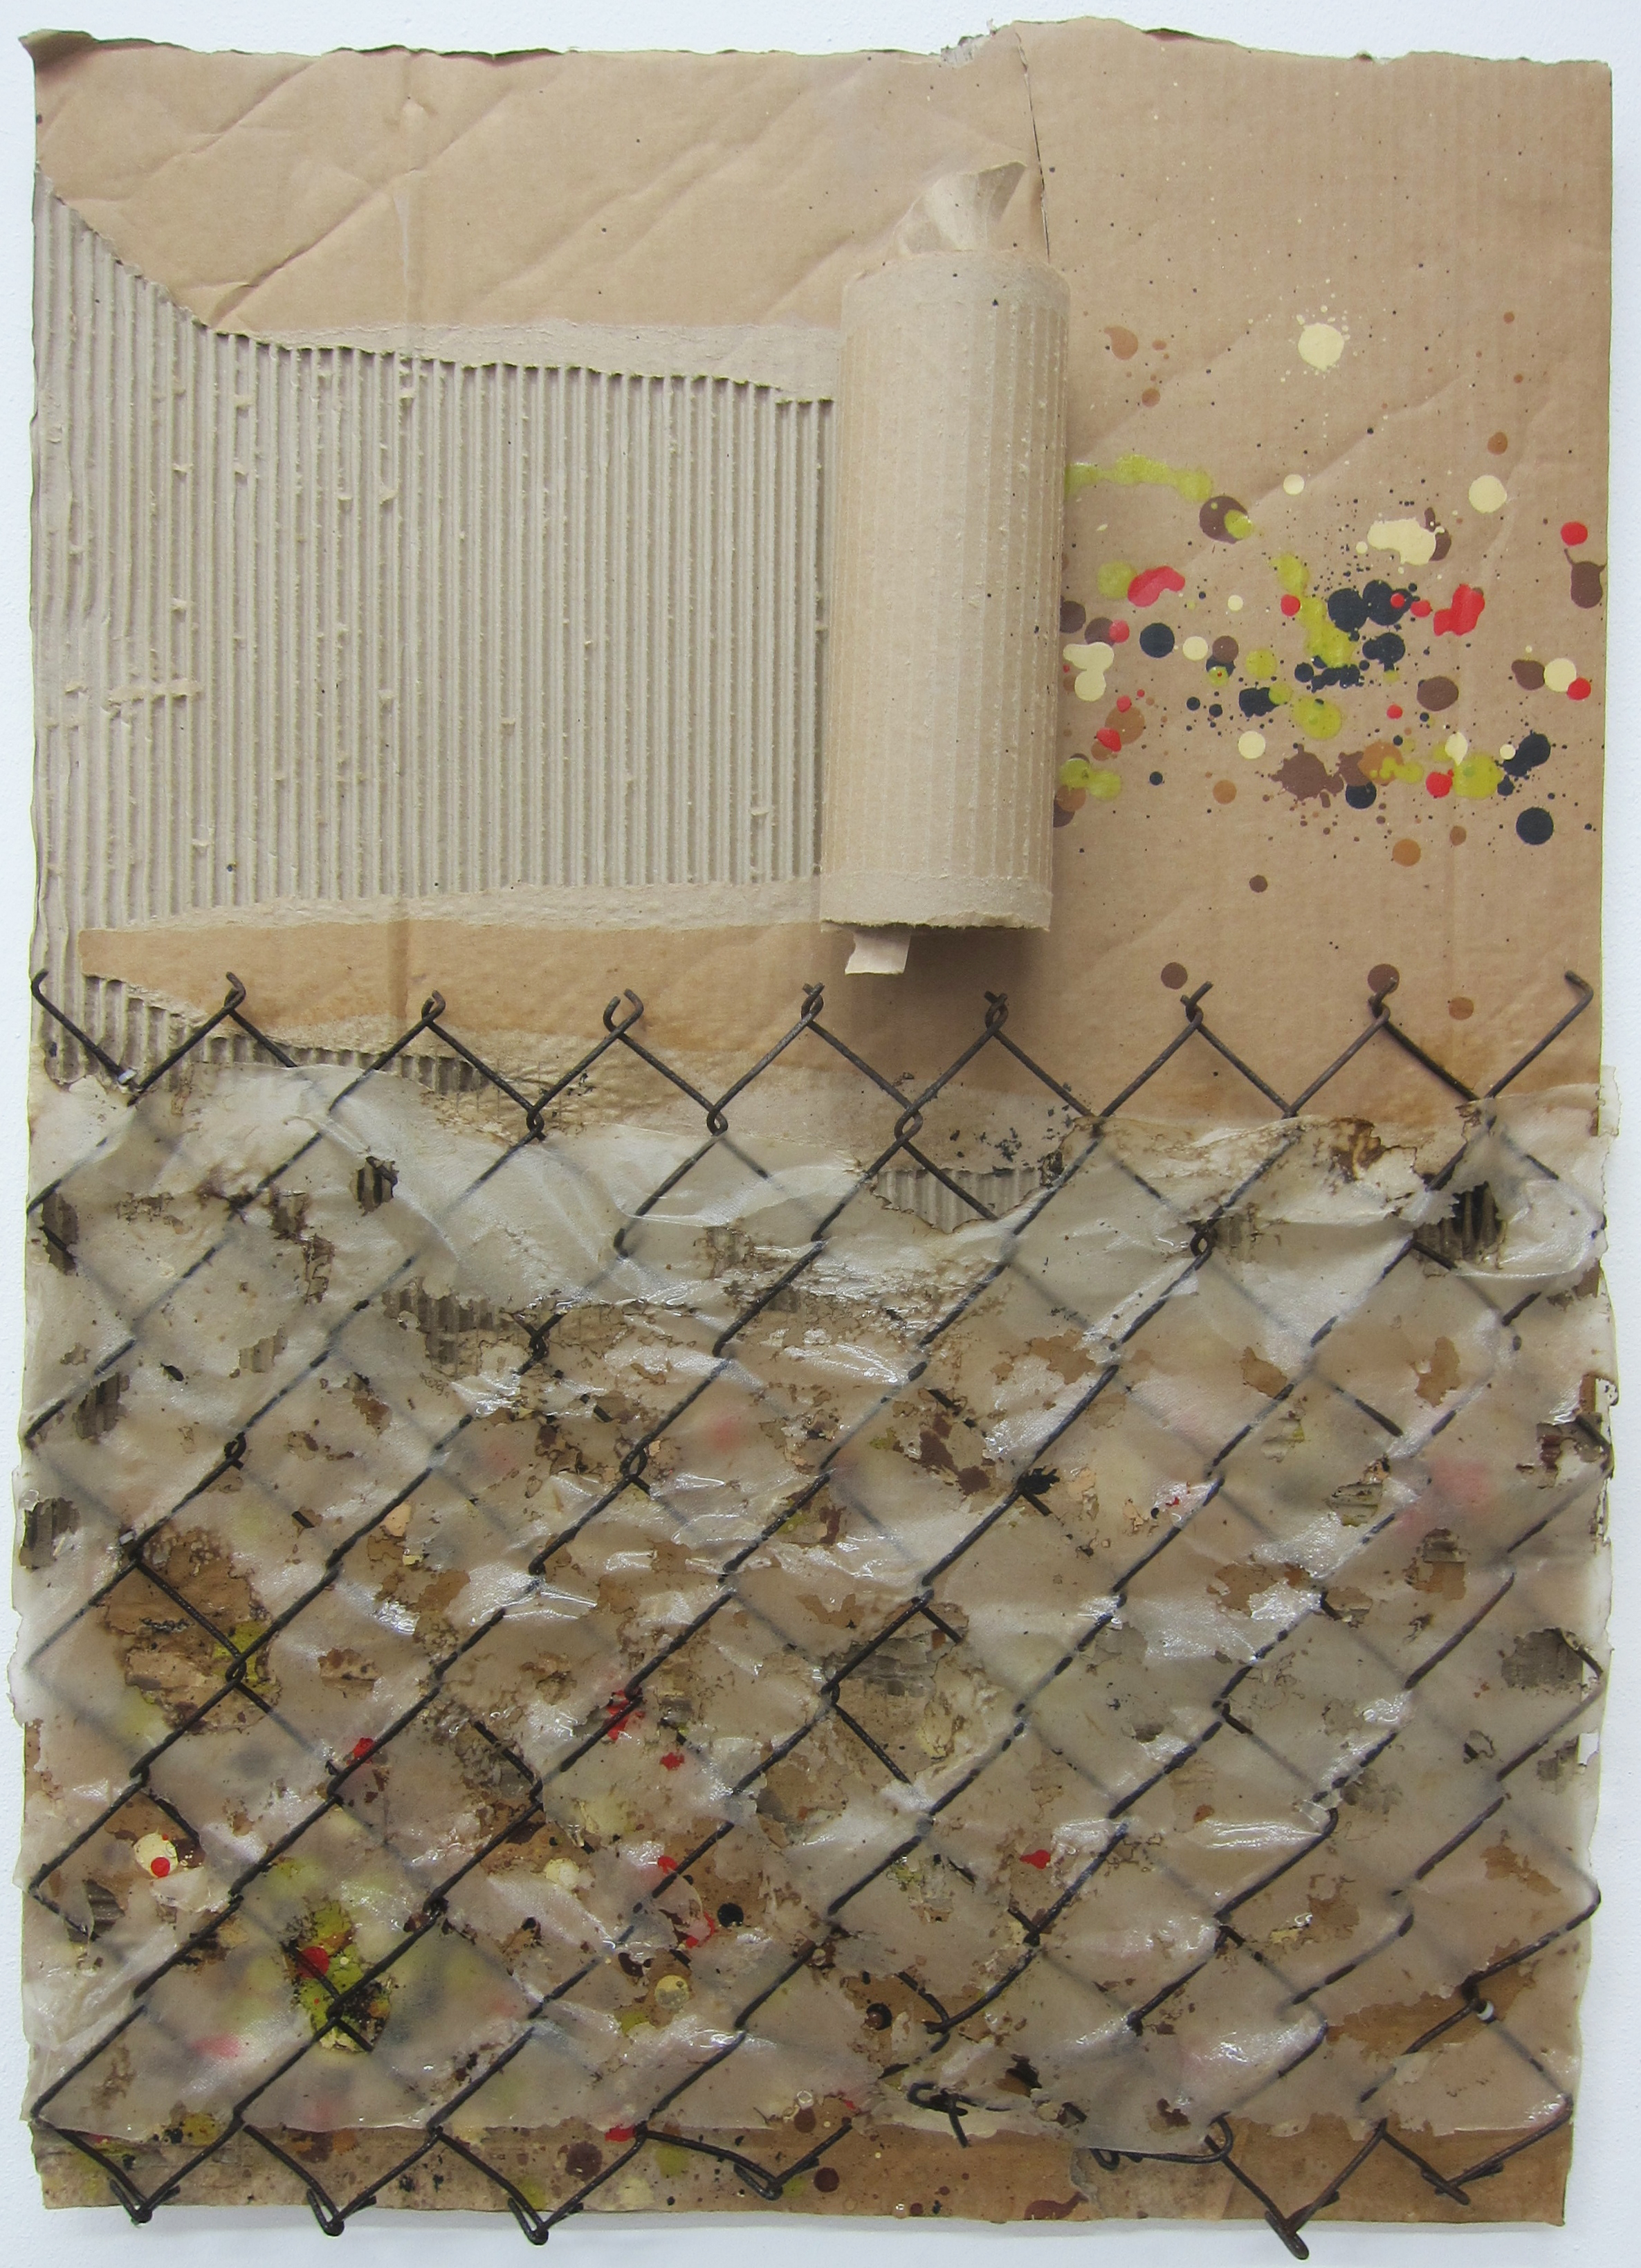   Air Speckle (R).&nbsp;   Cardboard, fence, paper,&nbsp;alkyd resin, fire and water.&nbsp;  80 x 58 cm.  2015. 